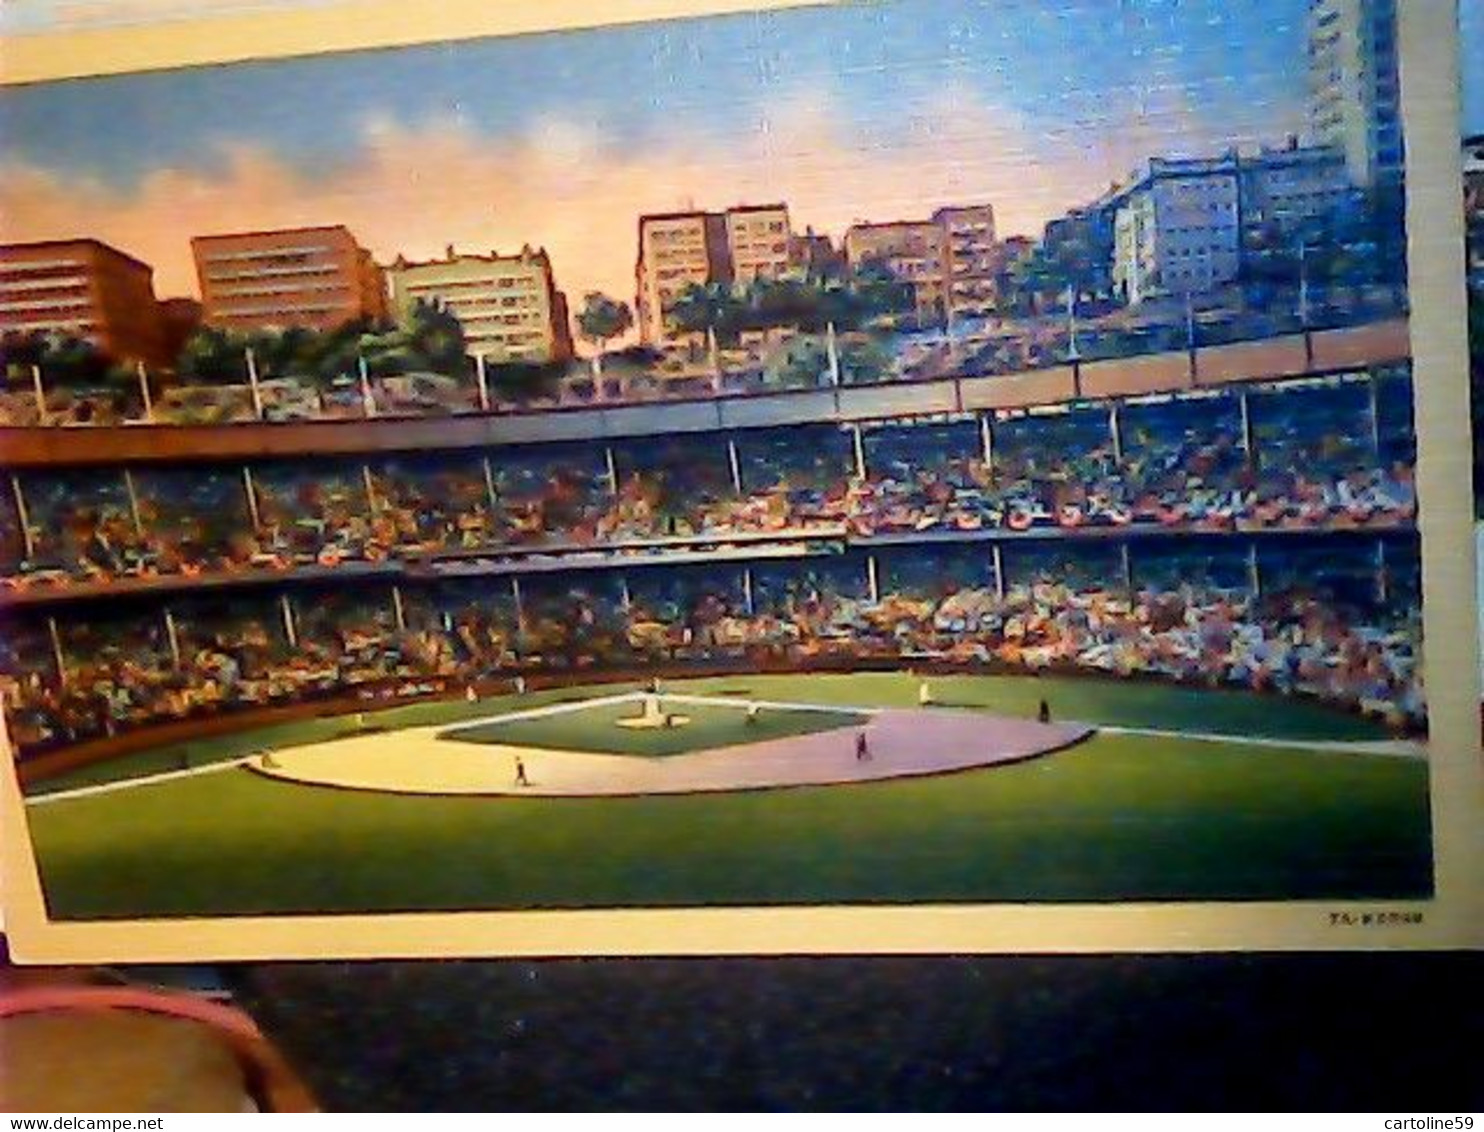 SPORTS BEISBOL BASEBALL NEW YORK STADE GIANTS POLO GROUNDS N1925 IG10057 - Stades & Structures Sportives